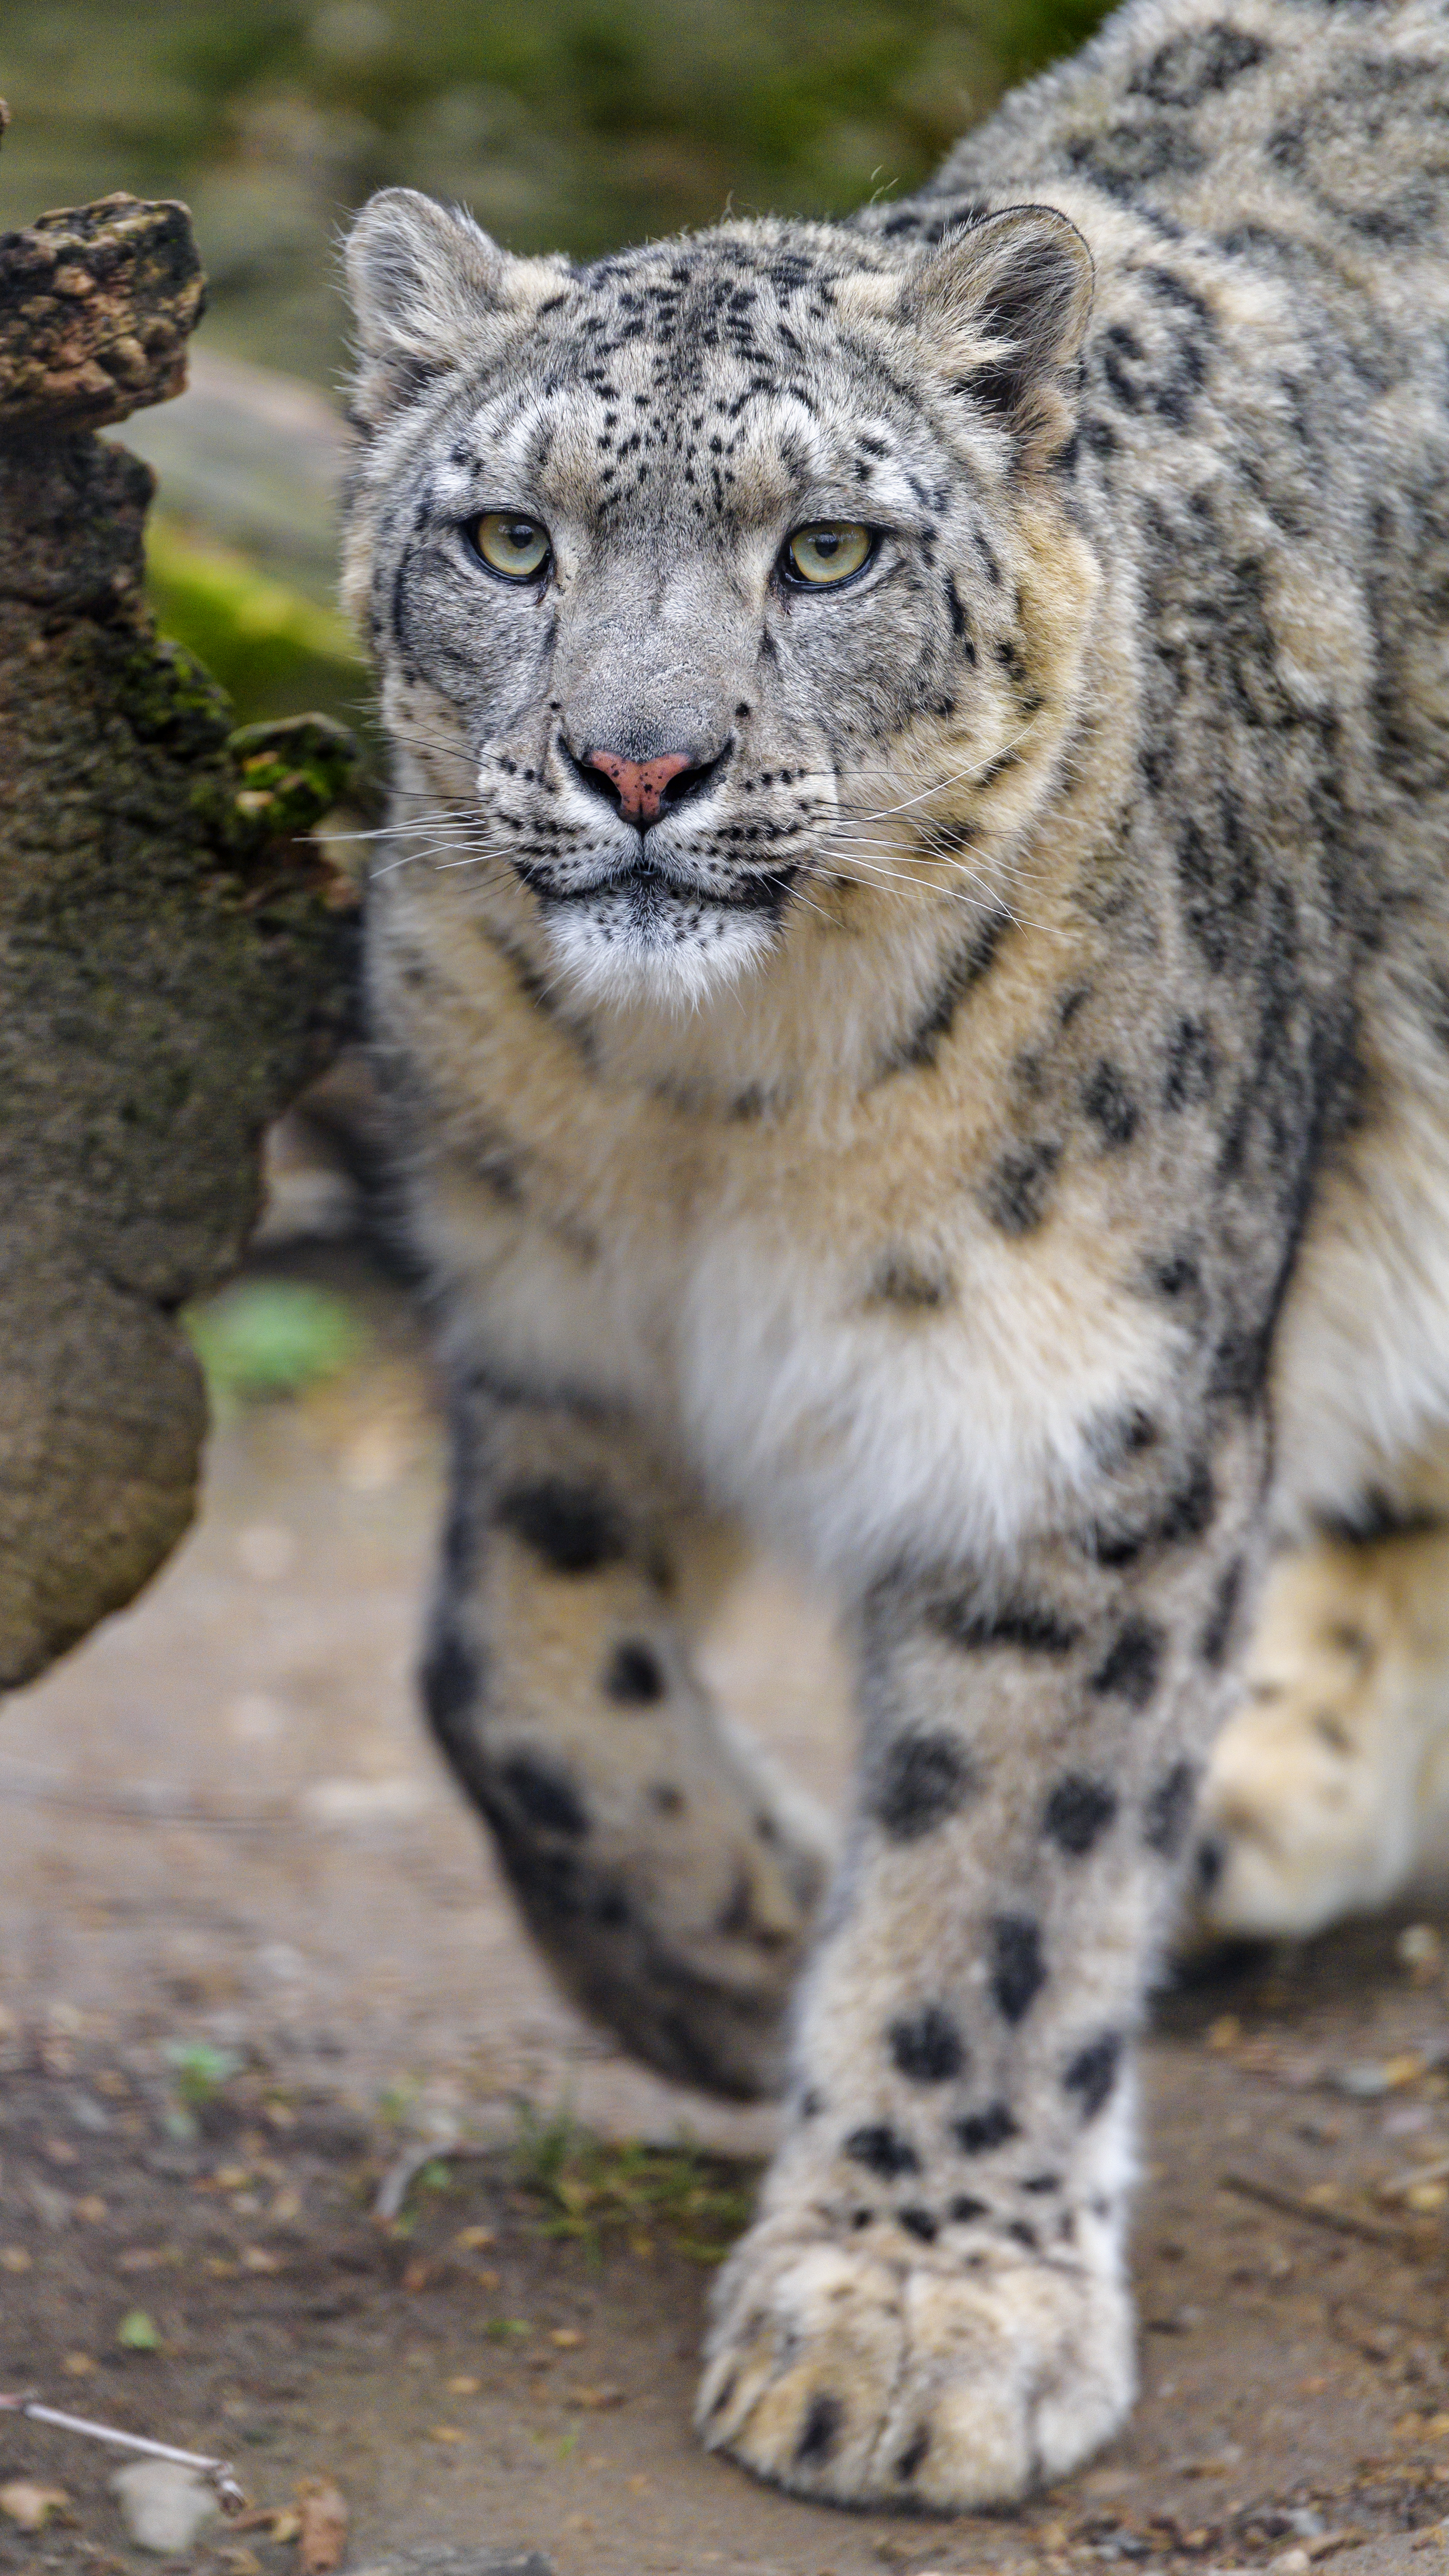 64736 download wallpaper snow leopard, animals, predator, big cat, wildlife, irbis screensavers and pictures for free